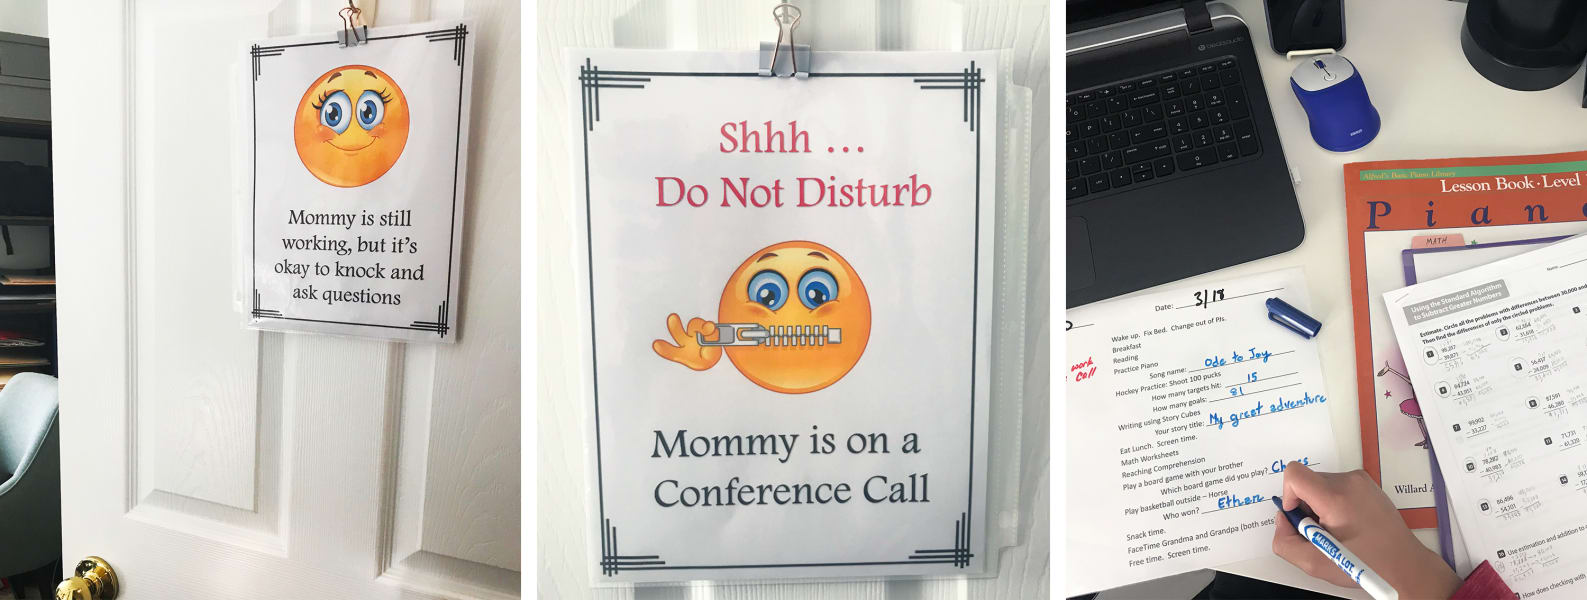 do not disturb mommy is on a conference call sign